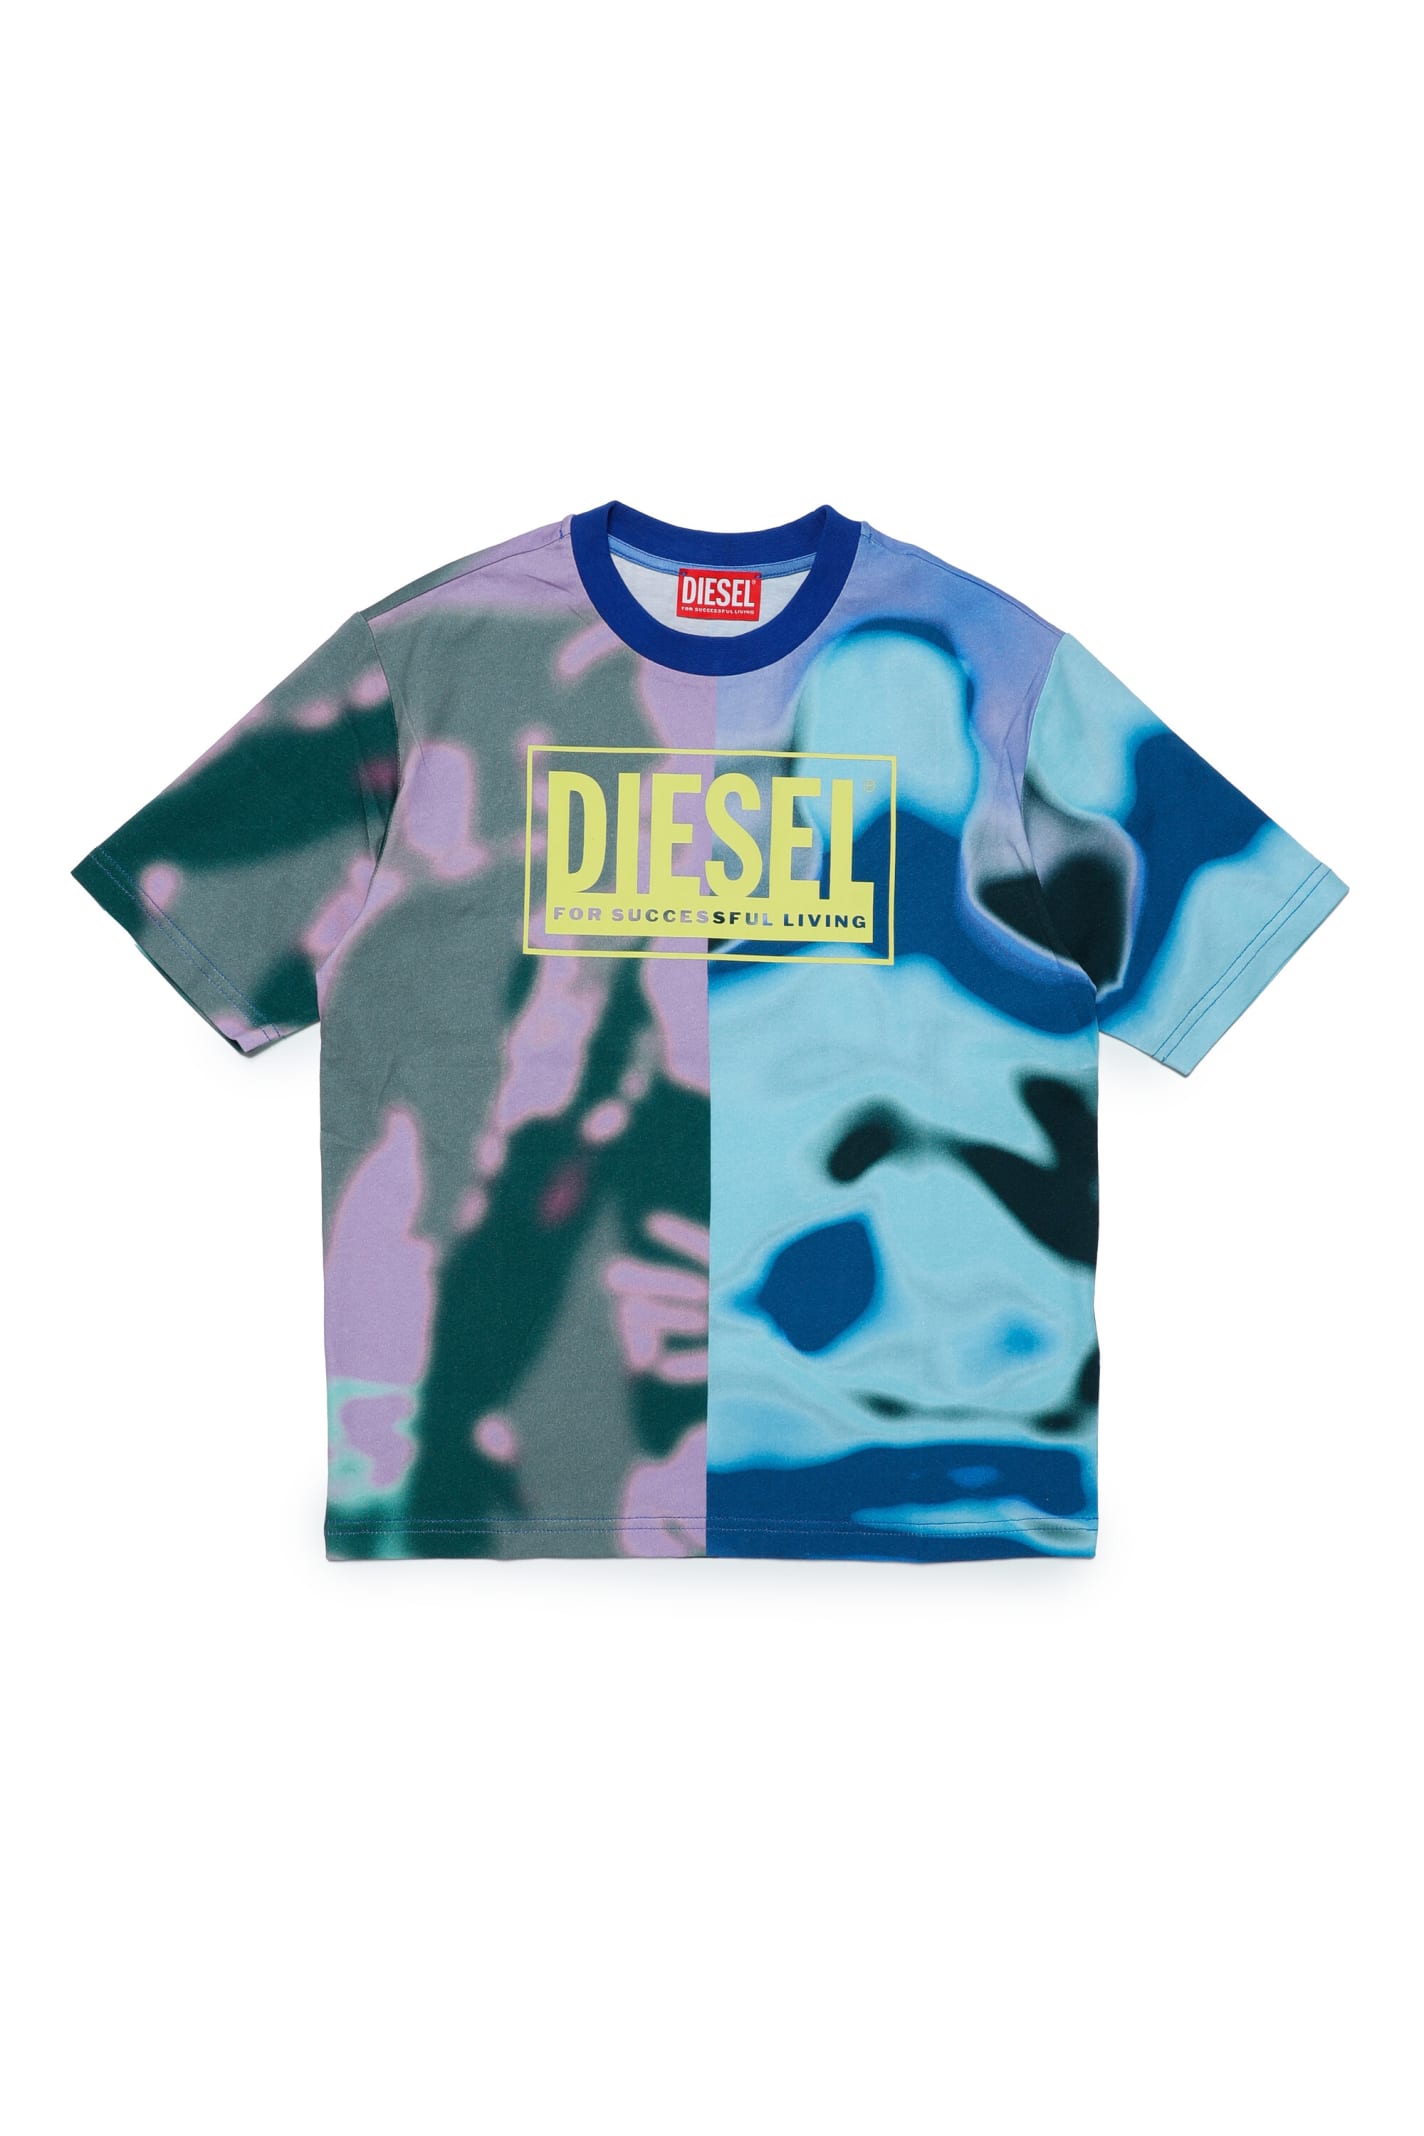 DIESEL TWASHER OVER T-SHIRT DIESEL MULTICOLOR ALLOVER JERSEY CREW-NECK T-SHIRT WITH ABSTRACT PRINT AND LOGO